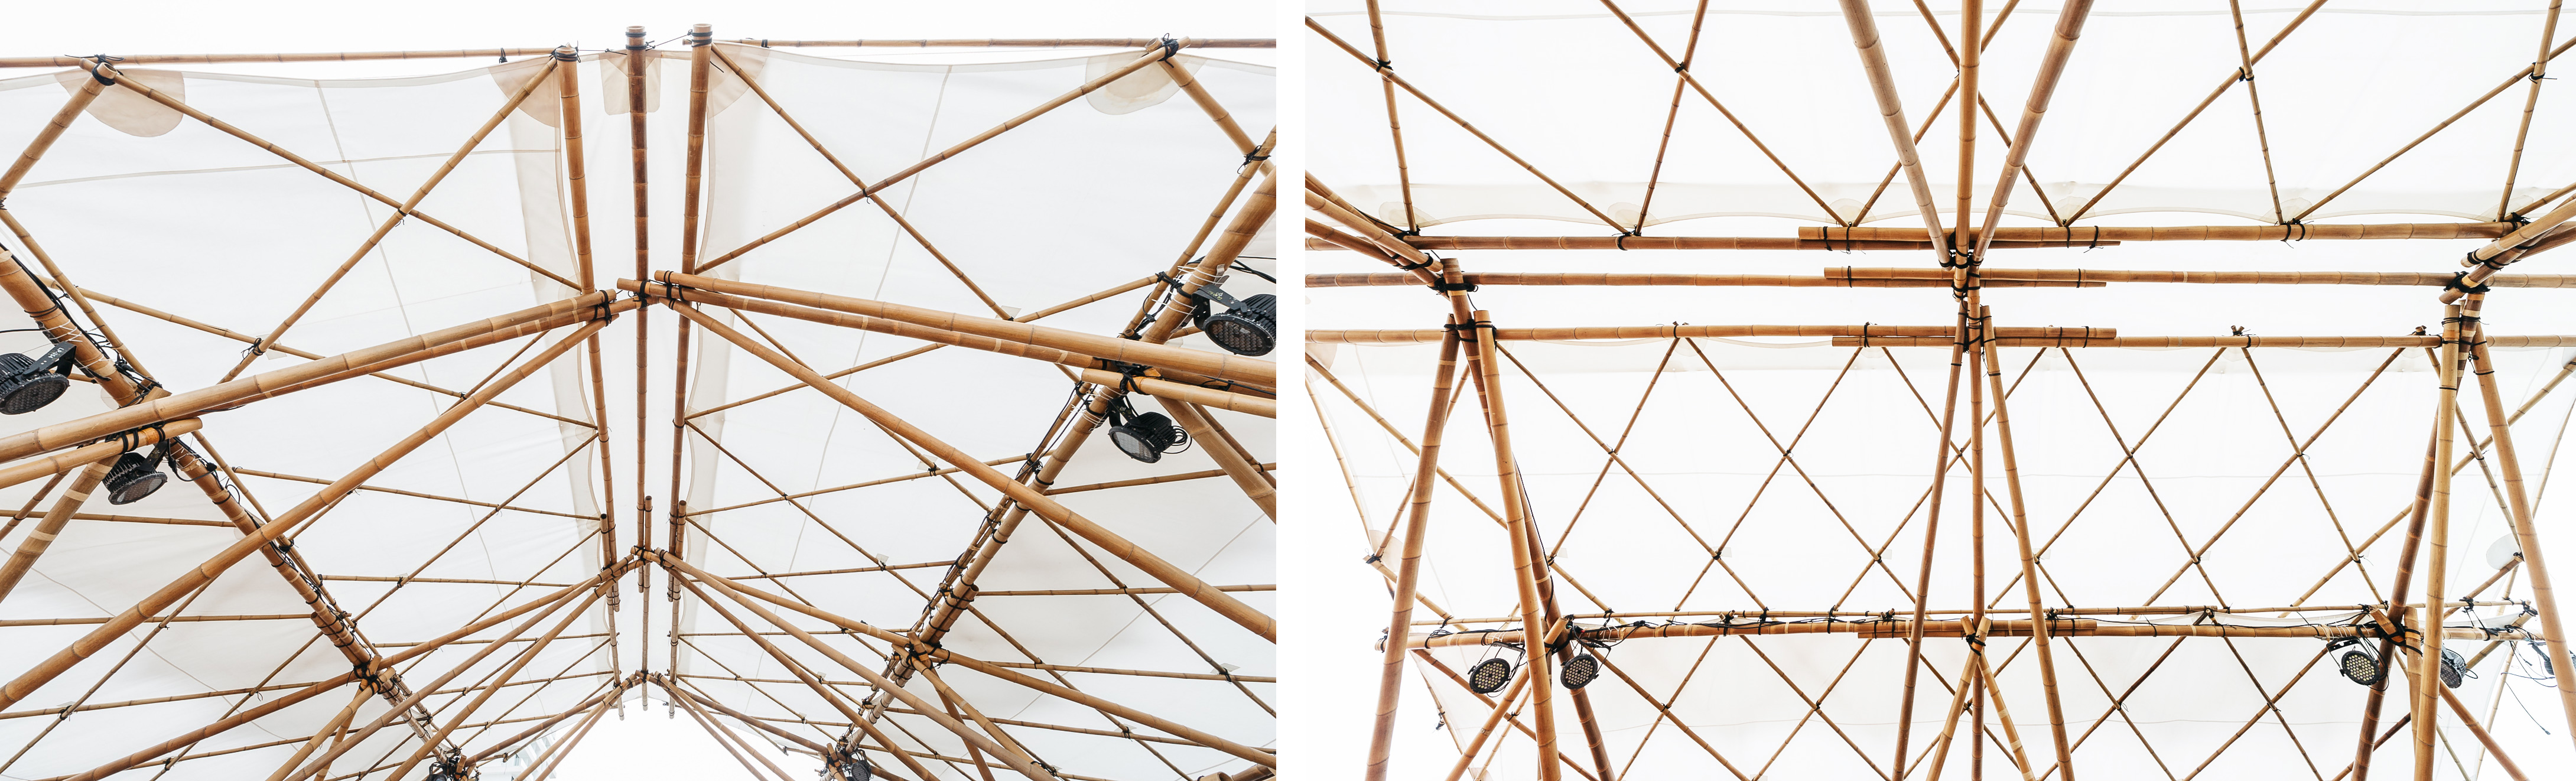 Deployable-Bamboo-Roof-Structure-2.jpg